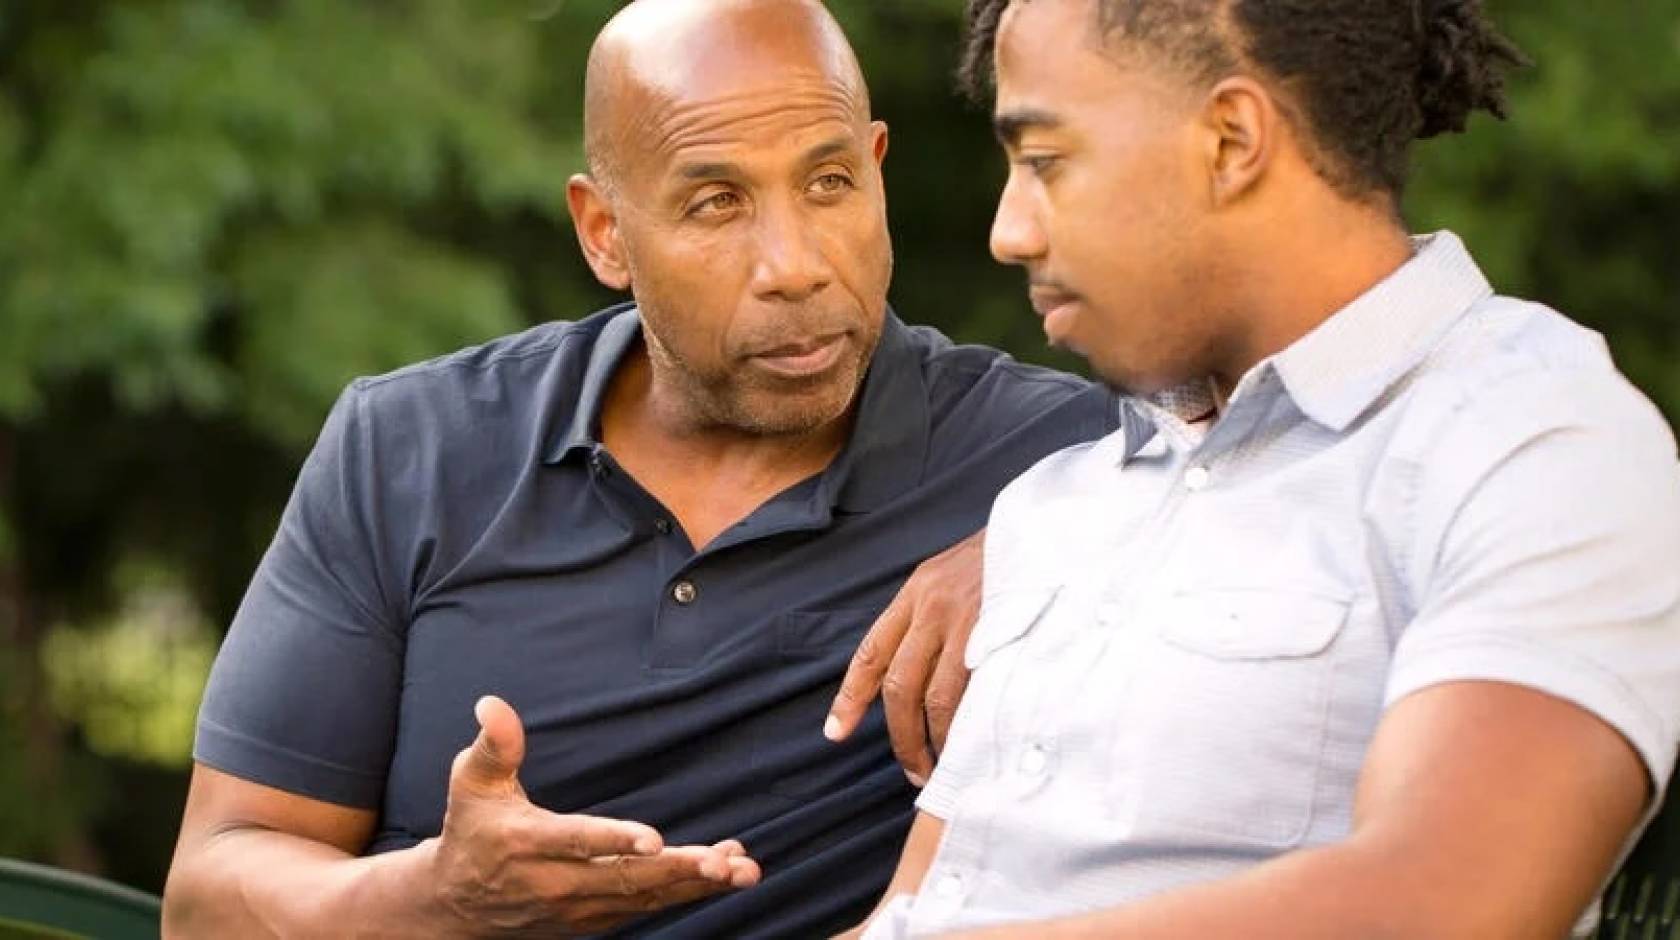 A father and his teen son sit on a park bench. The father is speaking intently to the son, who appears to be listening.